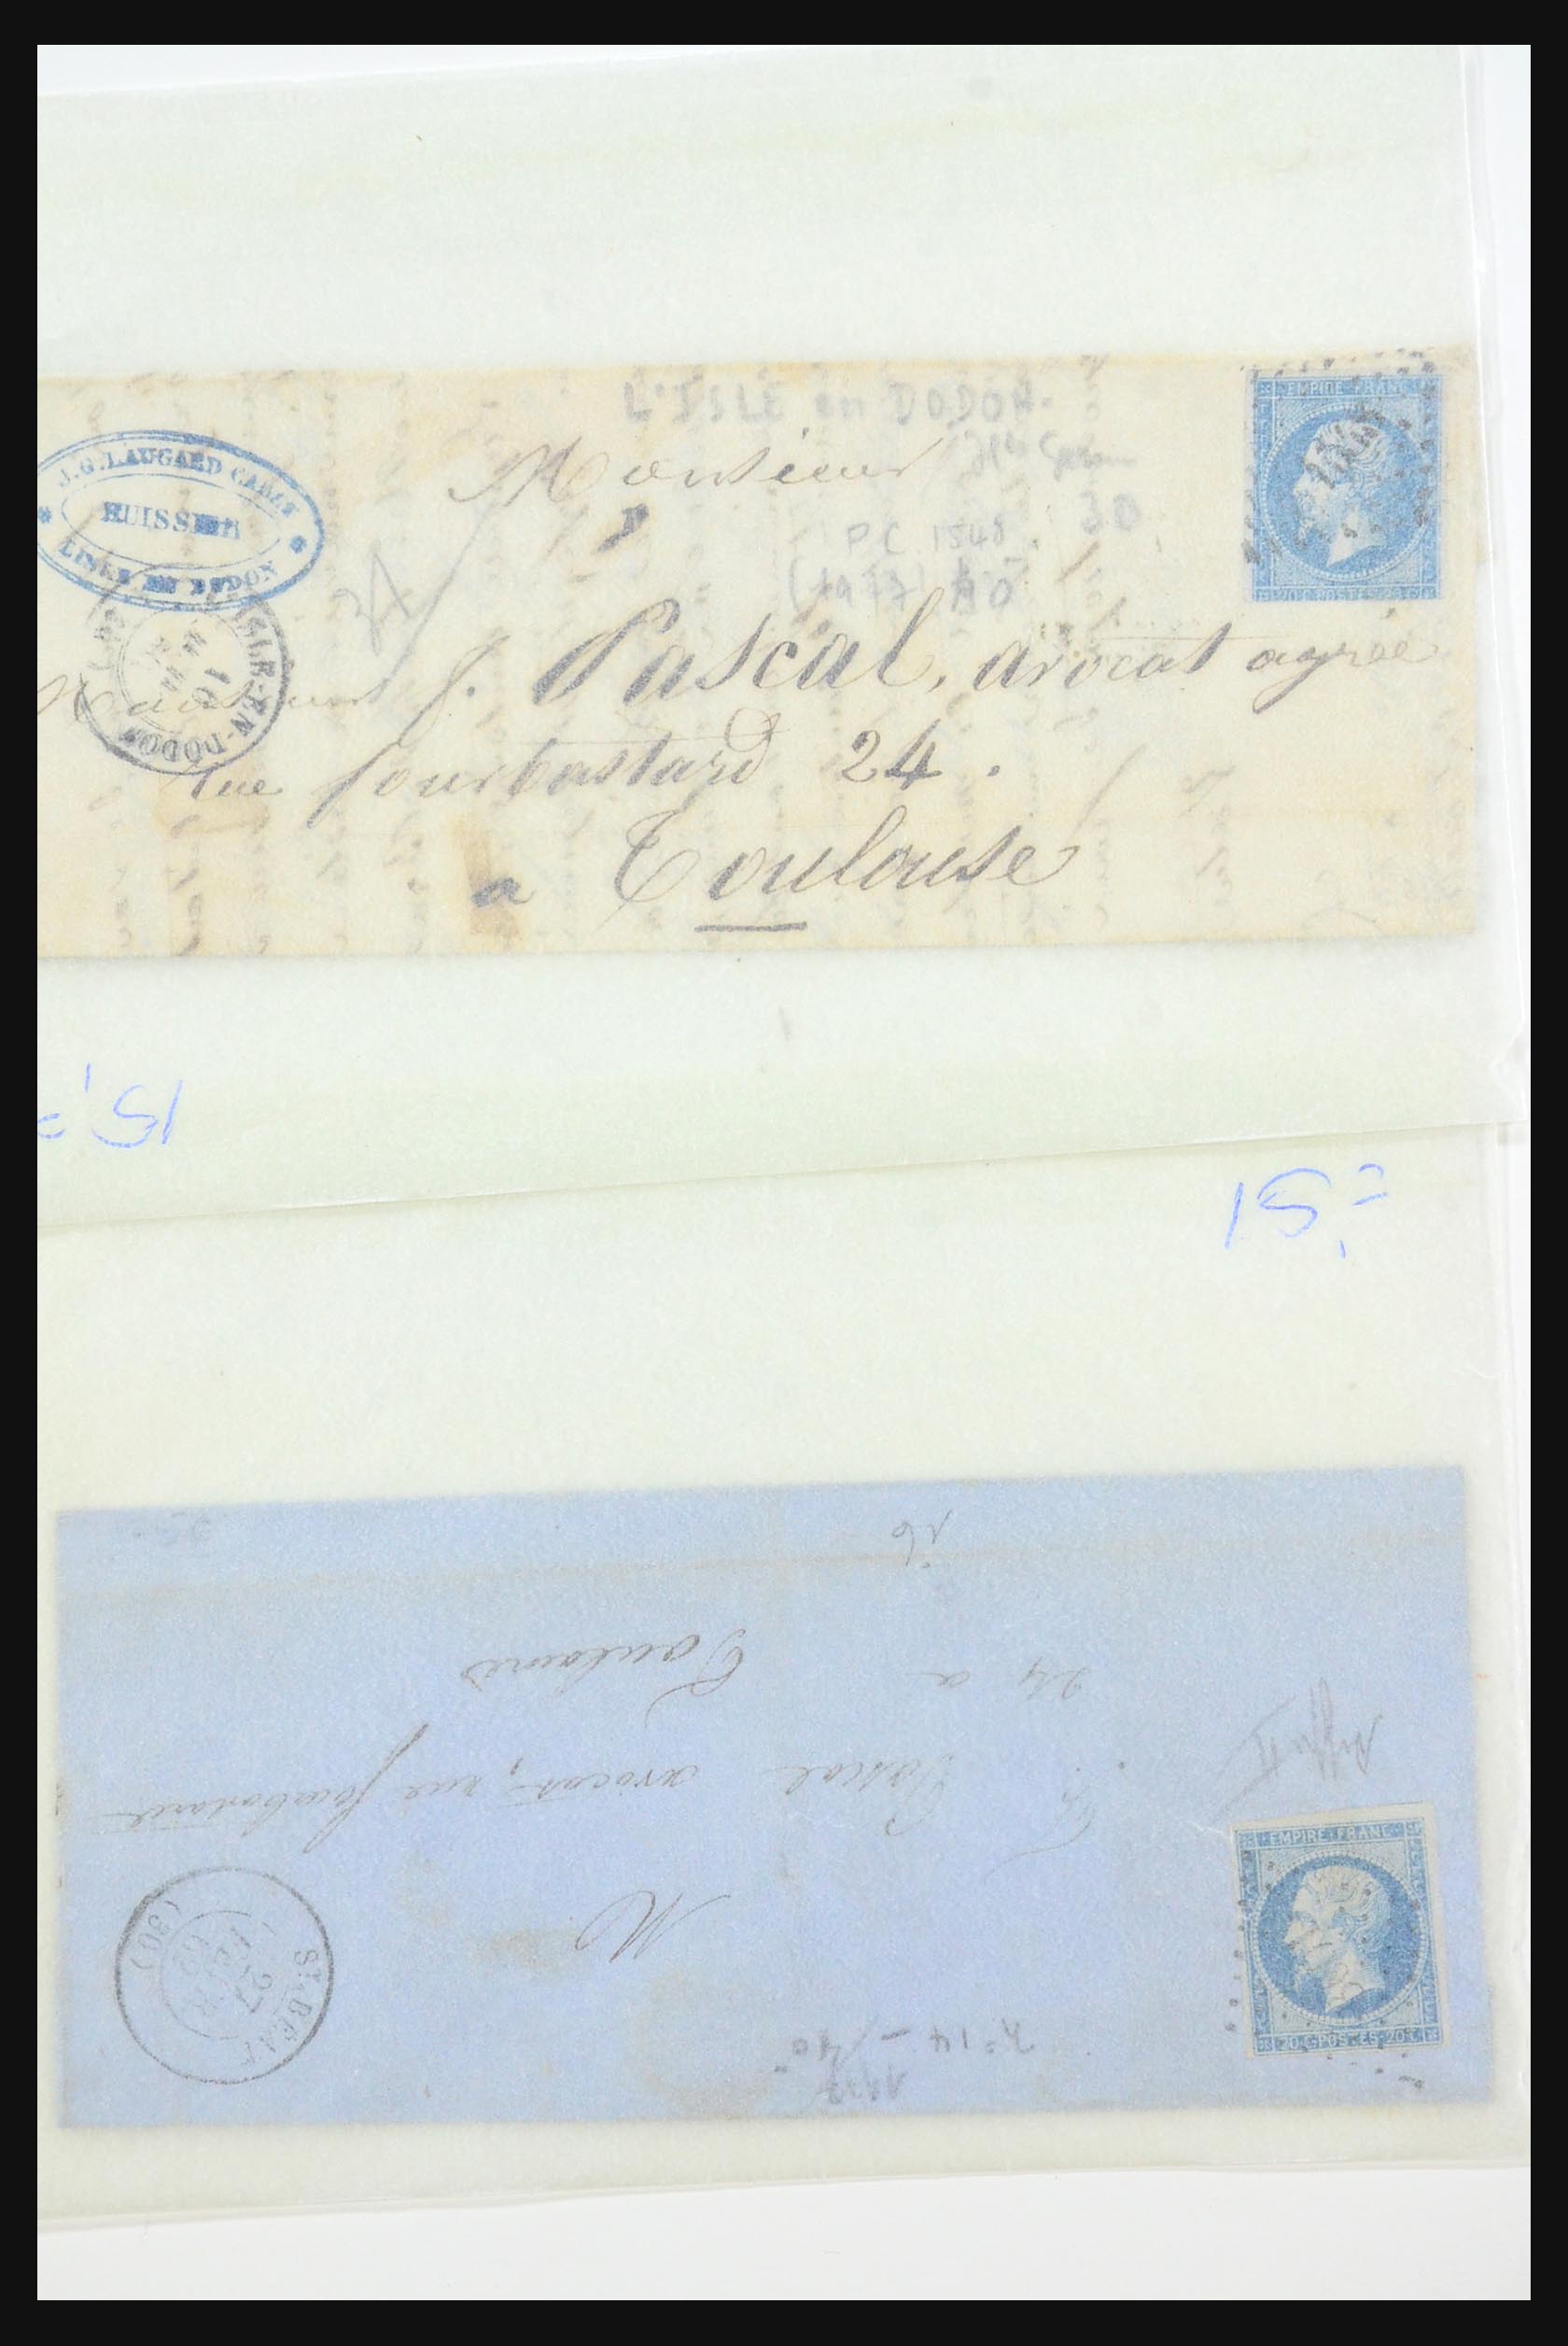 31359 0030 - 31359 France and Colonies covers 1770-1960.